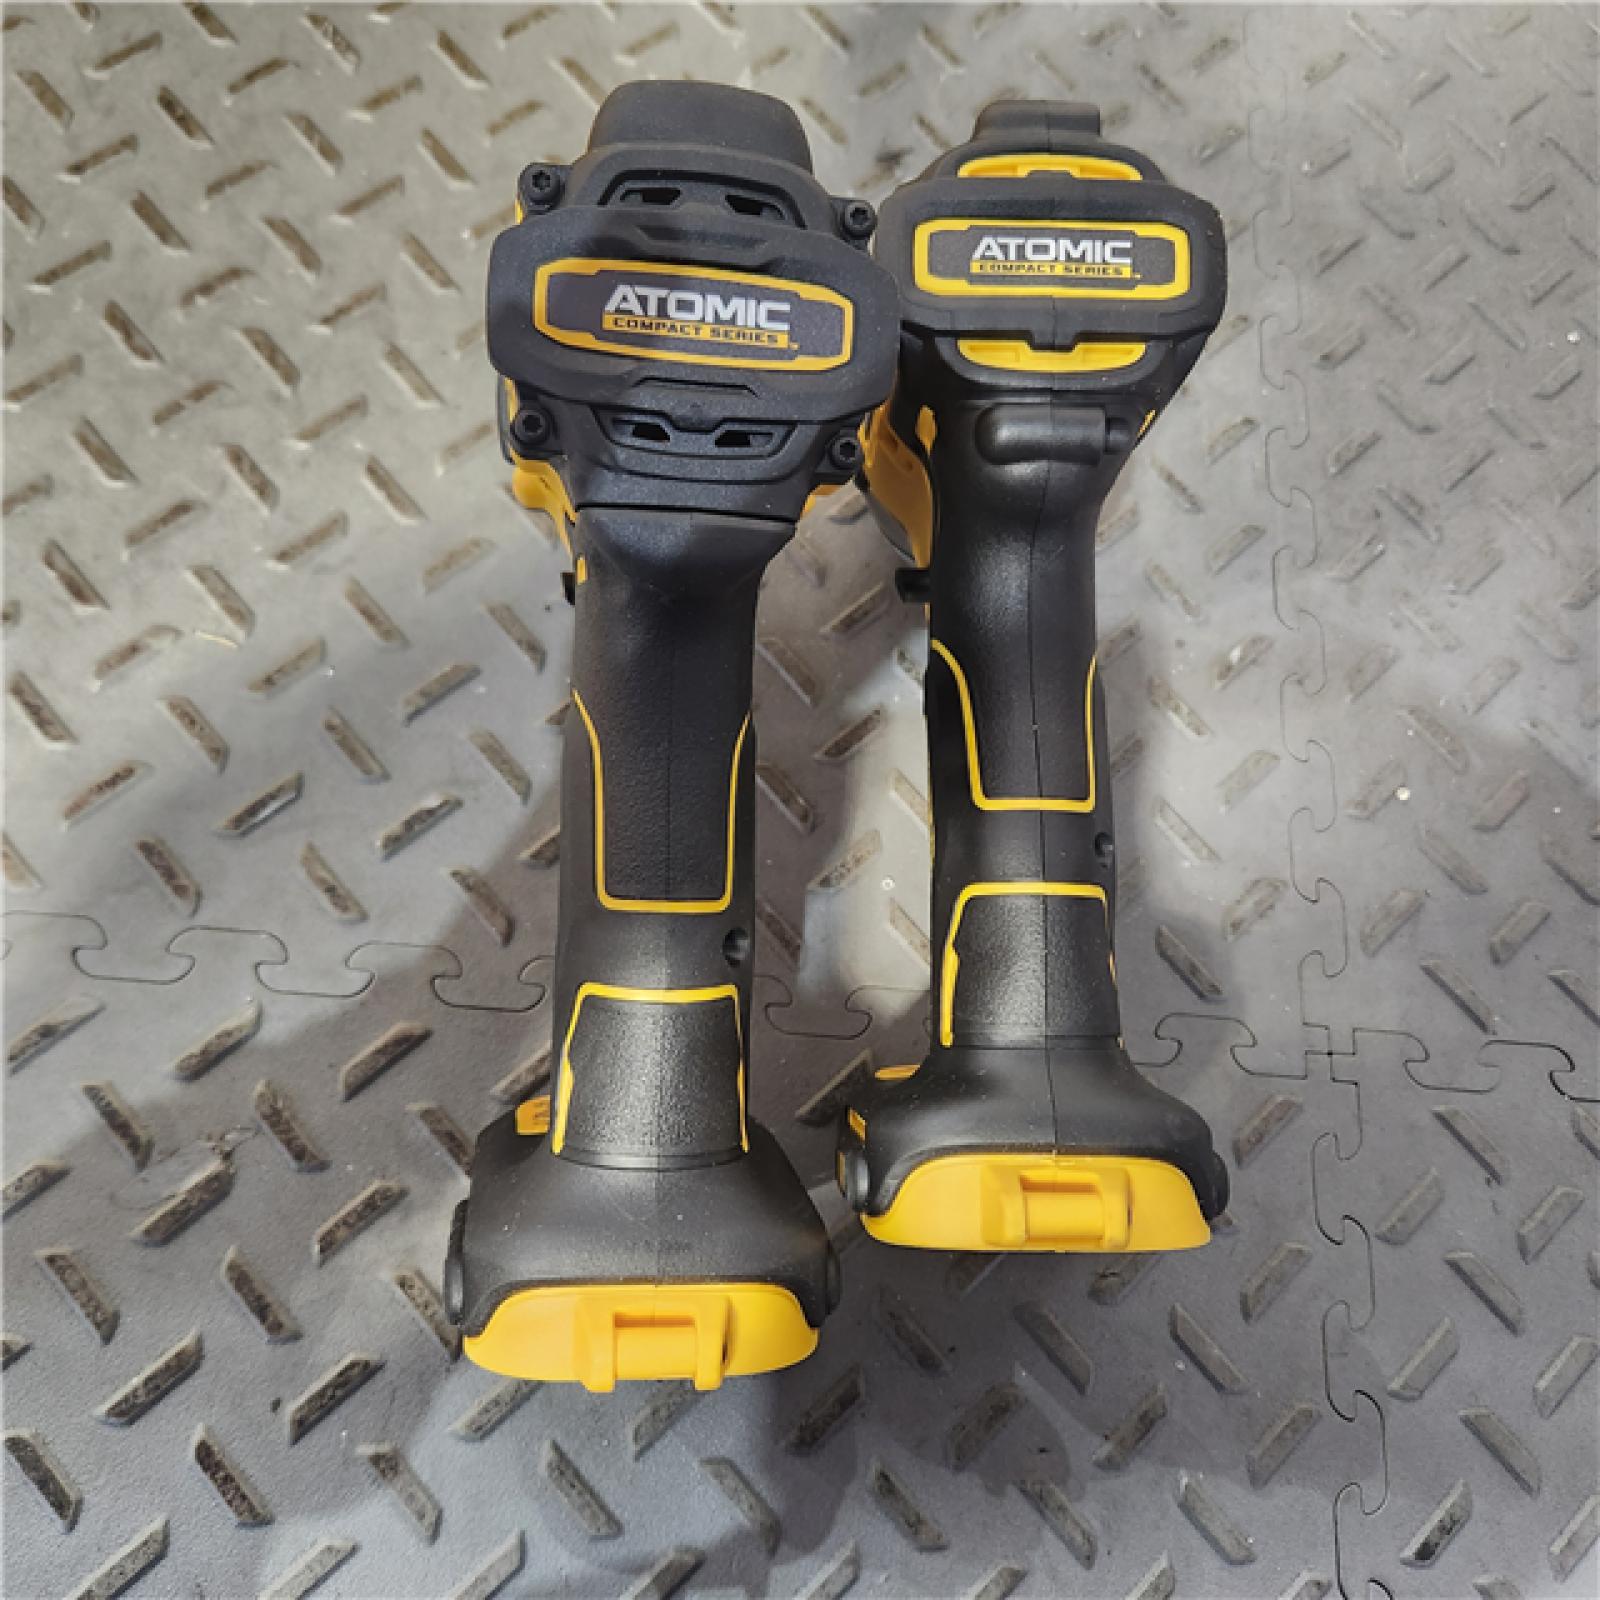 HOUSTON Location-AS-IS-DeWalt 20V MAX ATOMIC Cordless Brushless 2 Tool Compact Drill and Impact Driver Kit